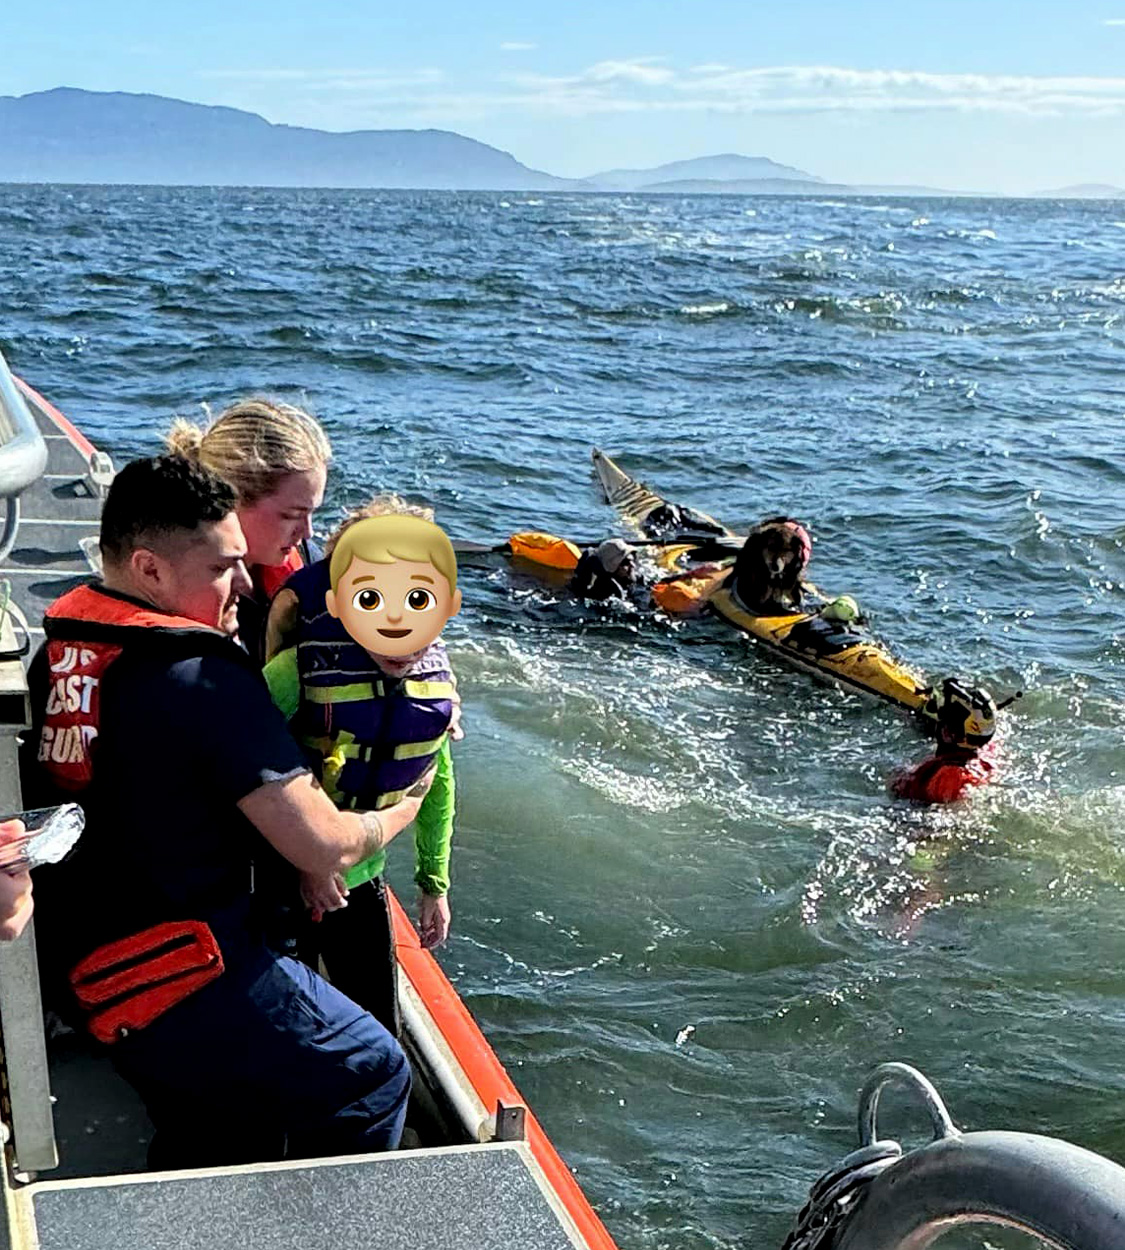 Coast guard rescues family of kayakers in bay.